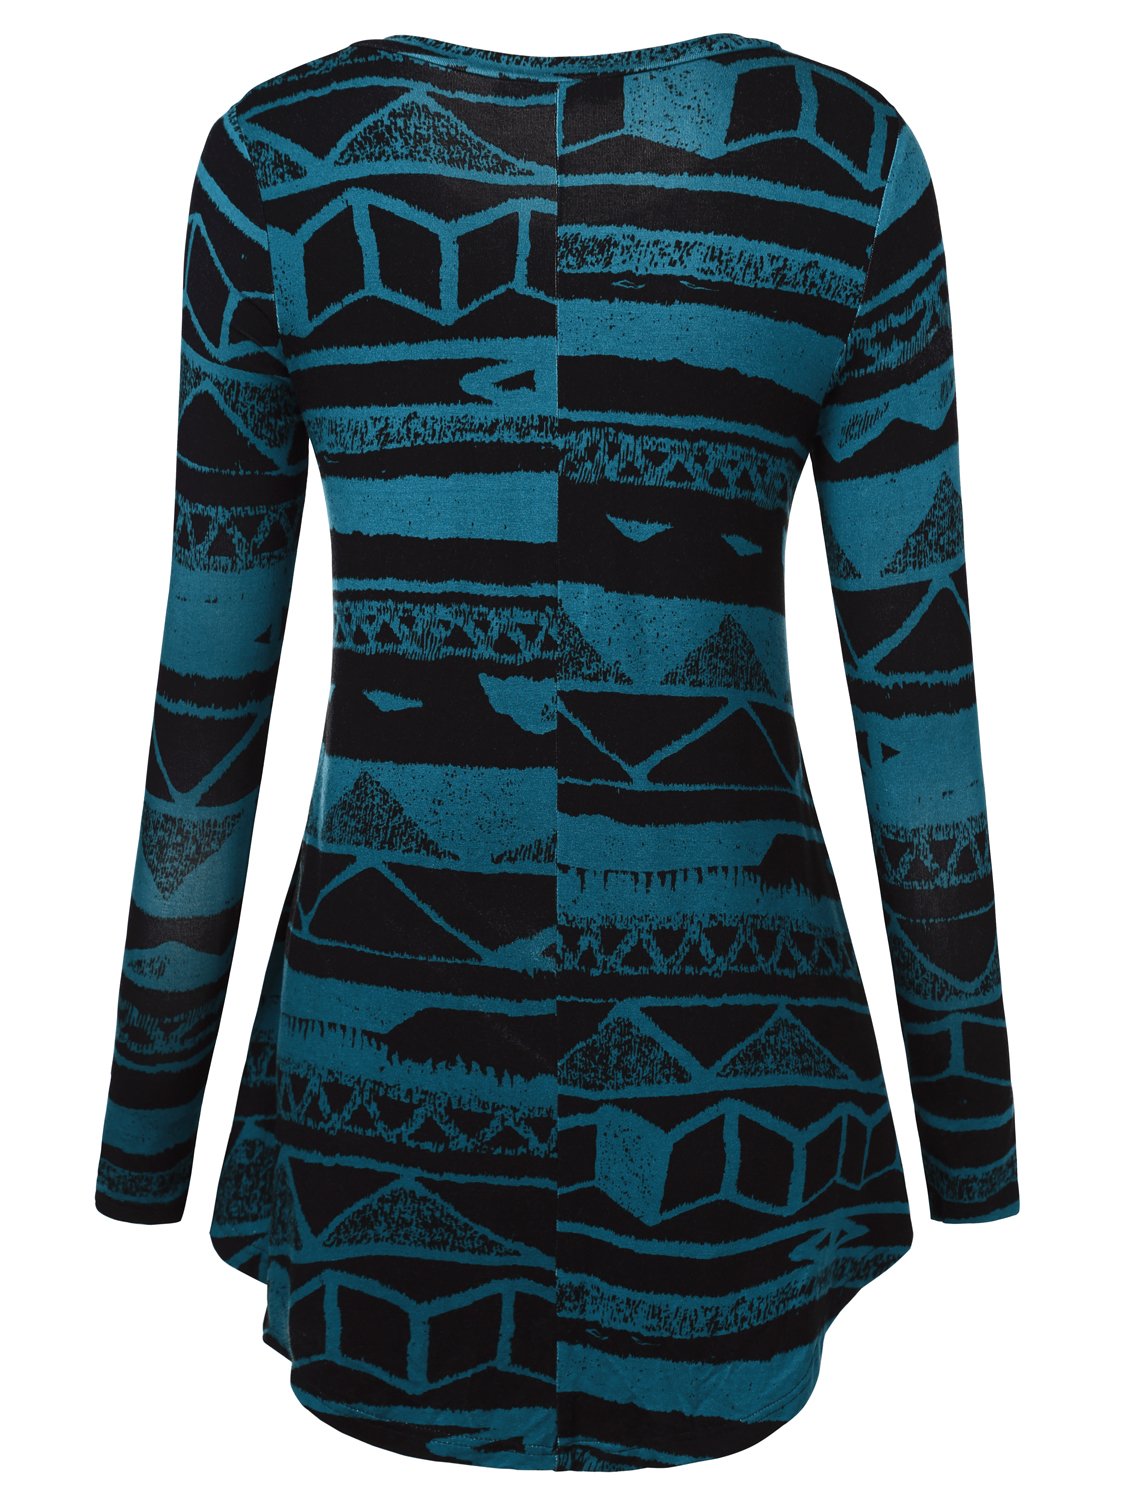 BAISHENGGT Blue Tribal Women's Long Sleeve Loose Flared Tunic Tops